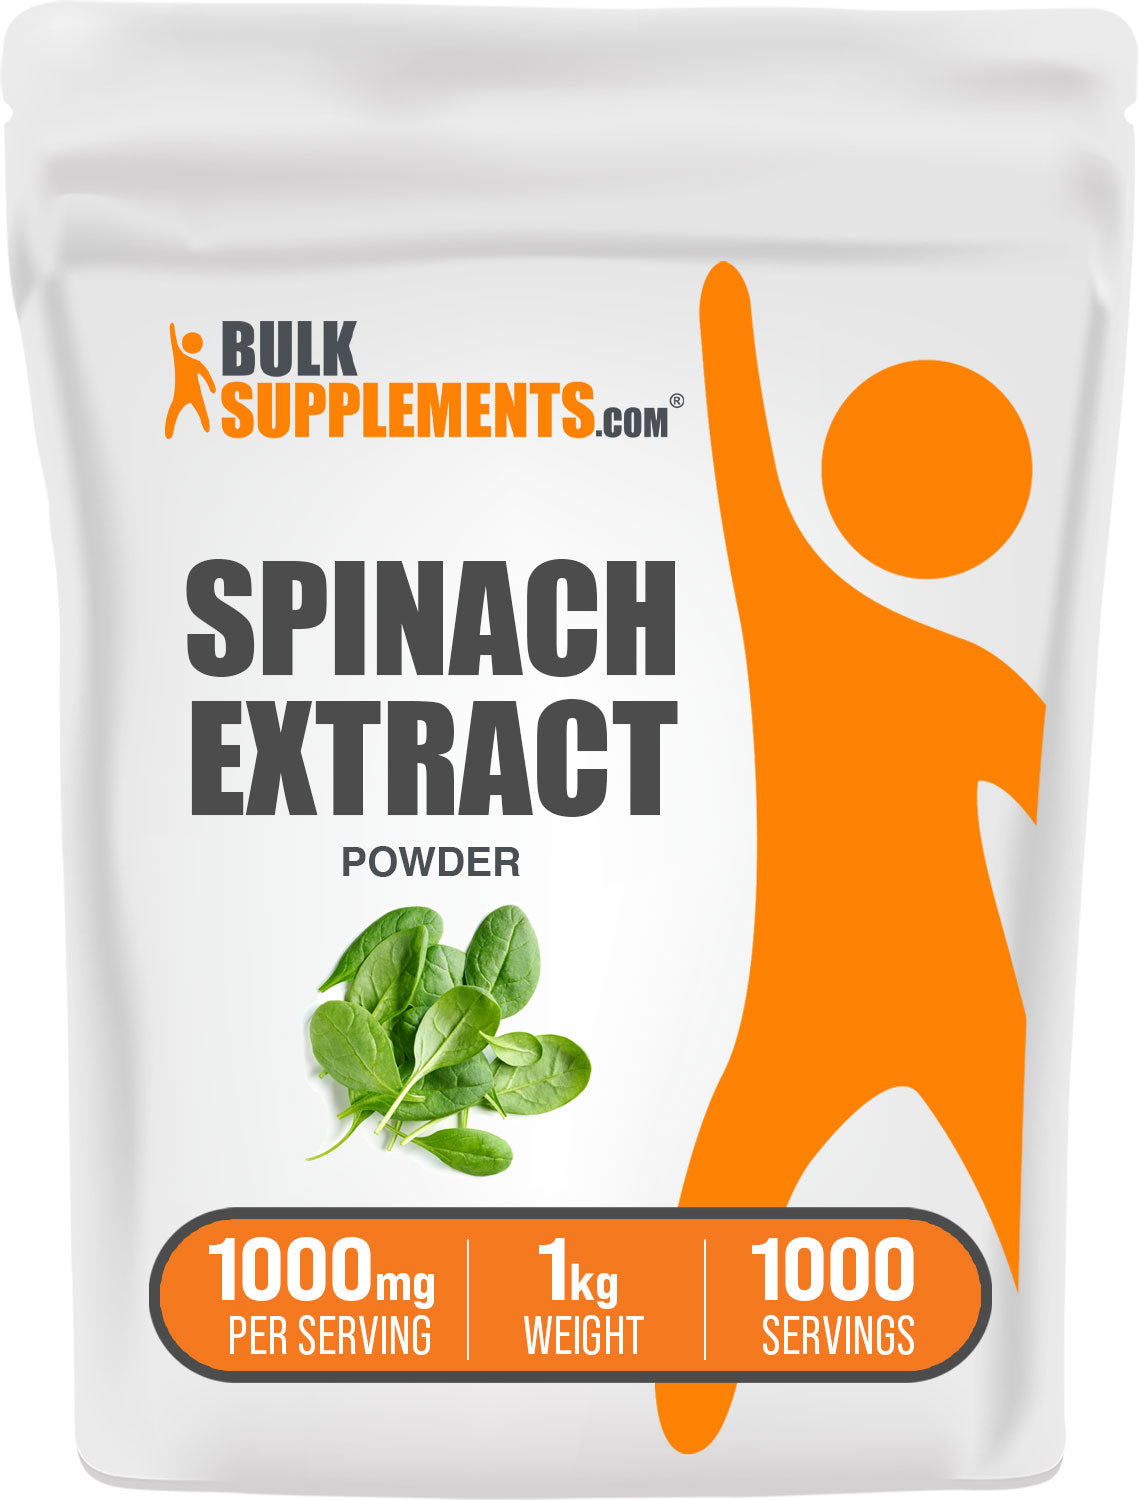 BulkSupplements Spinach Extract Powder 1kg bag